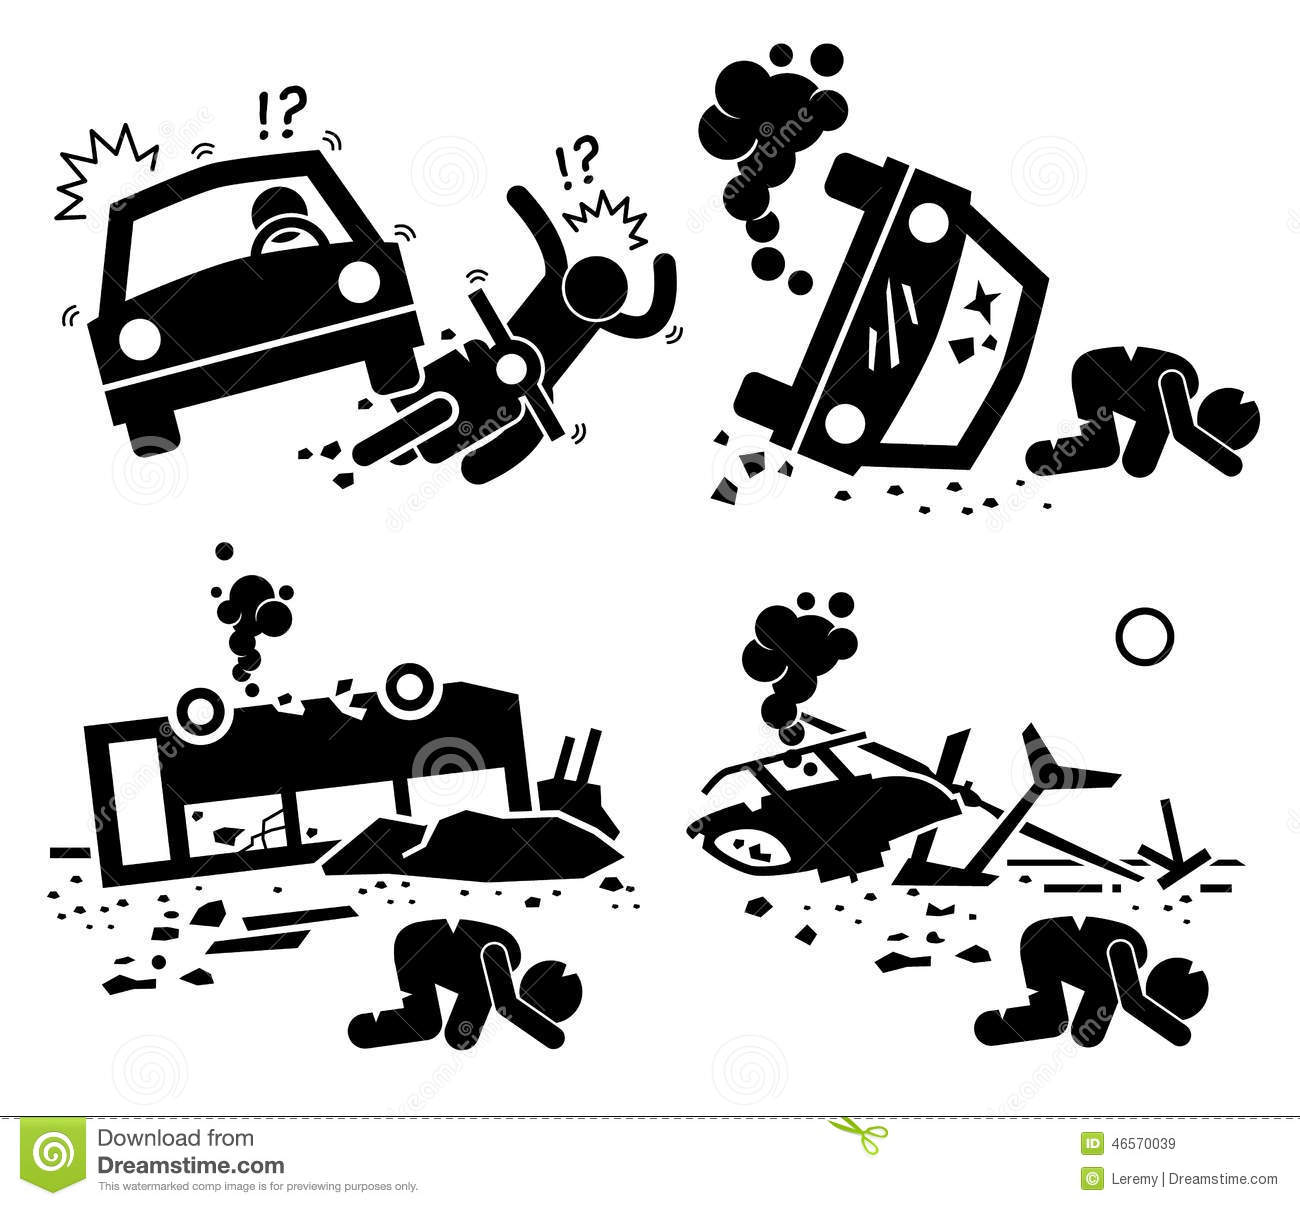 Disaster Accident And Tragedy Of A Car And Motorcycle Accident    